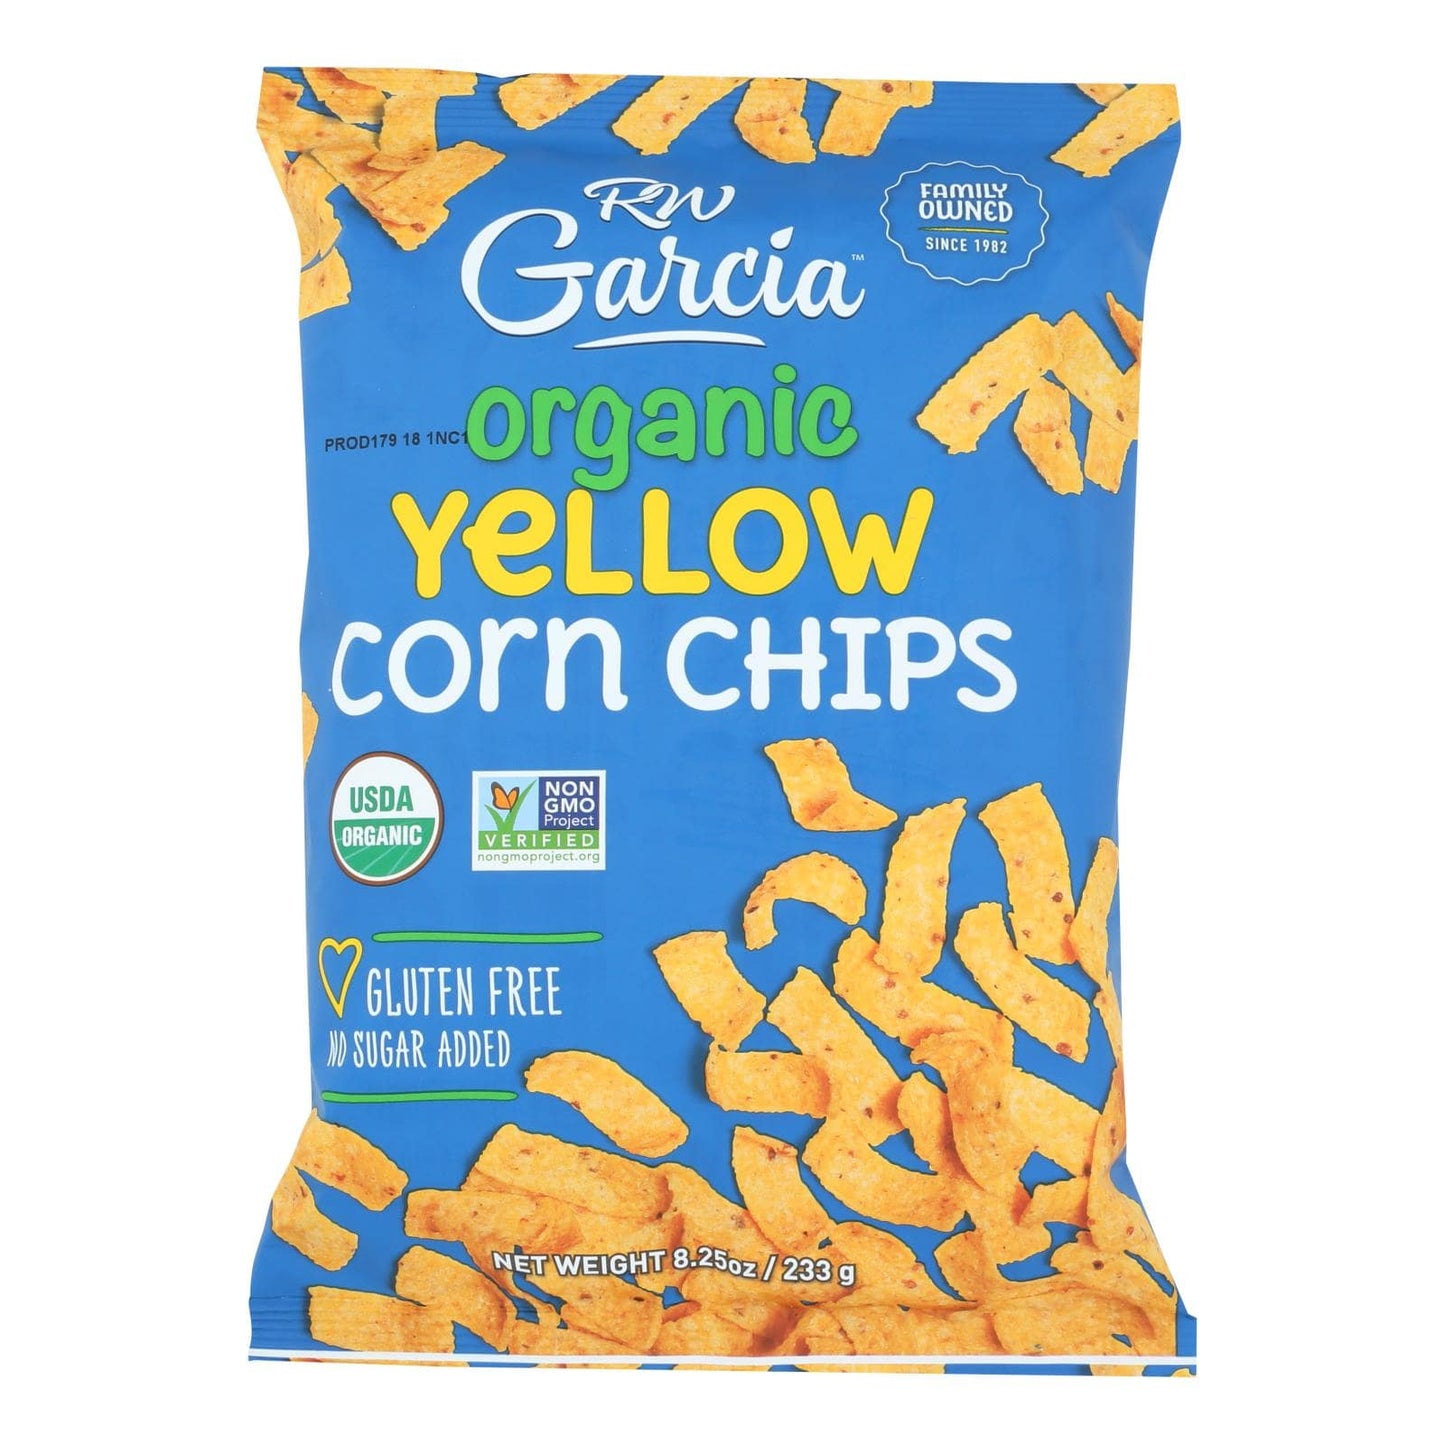 R. W. Garcia Organic Yellow Corn Chips - Case Of 12 - 8.25 Oz | OnlyNaturals.us